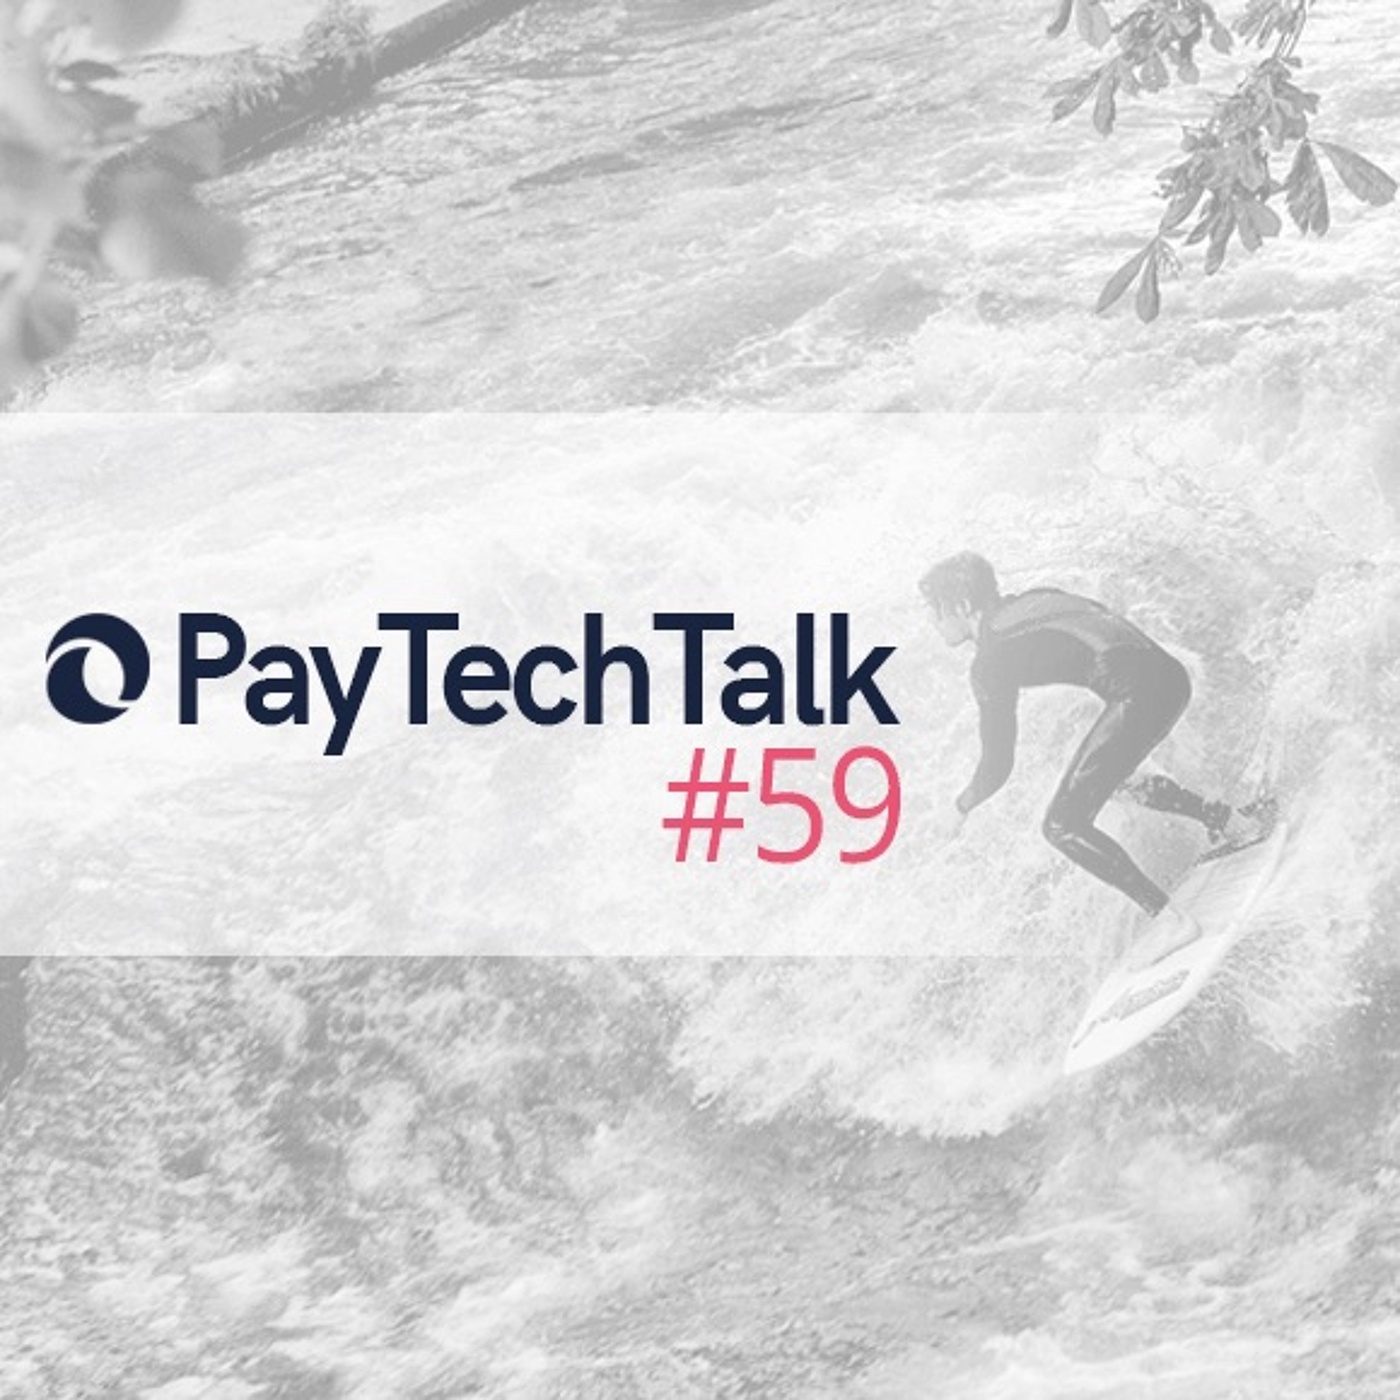 PayTechTalk 59 - Blockchain- and Crypto-Regulation from an international perspective